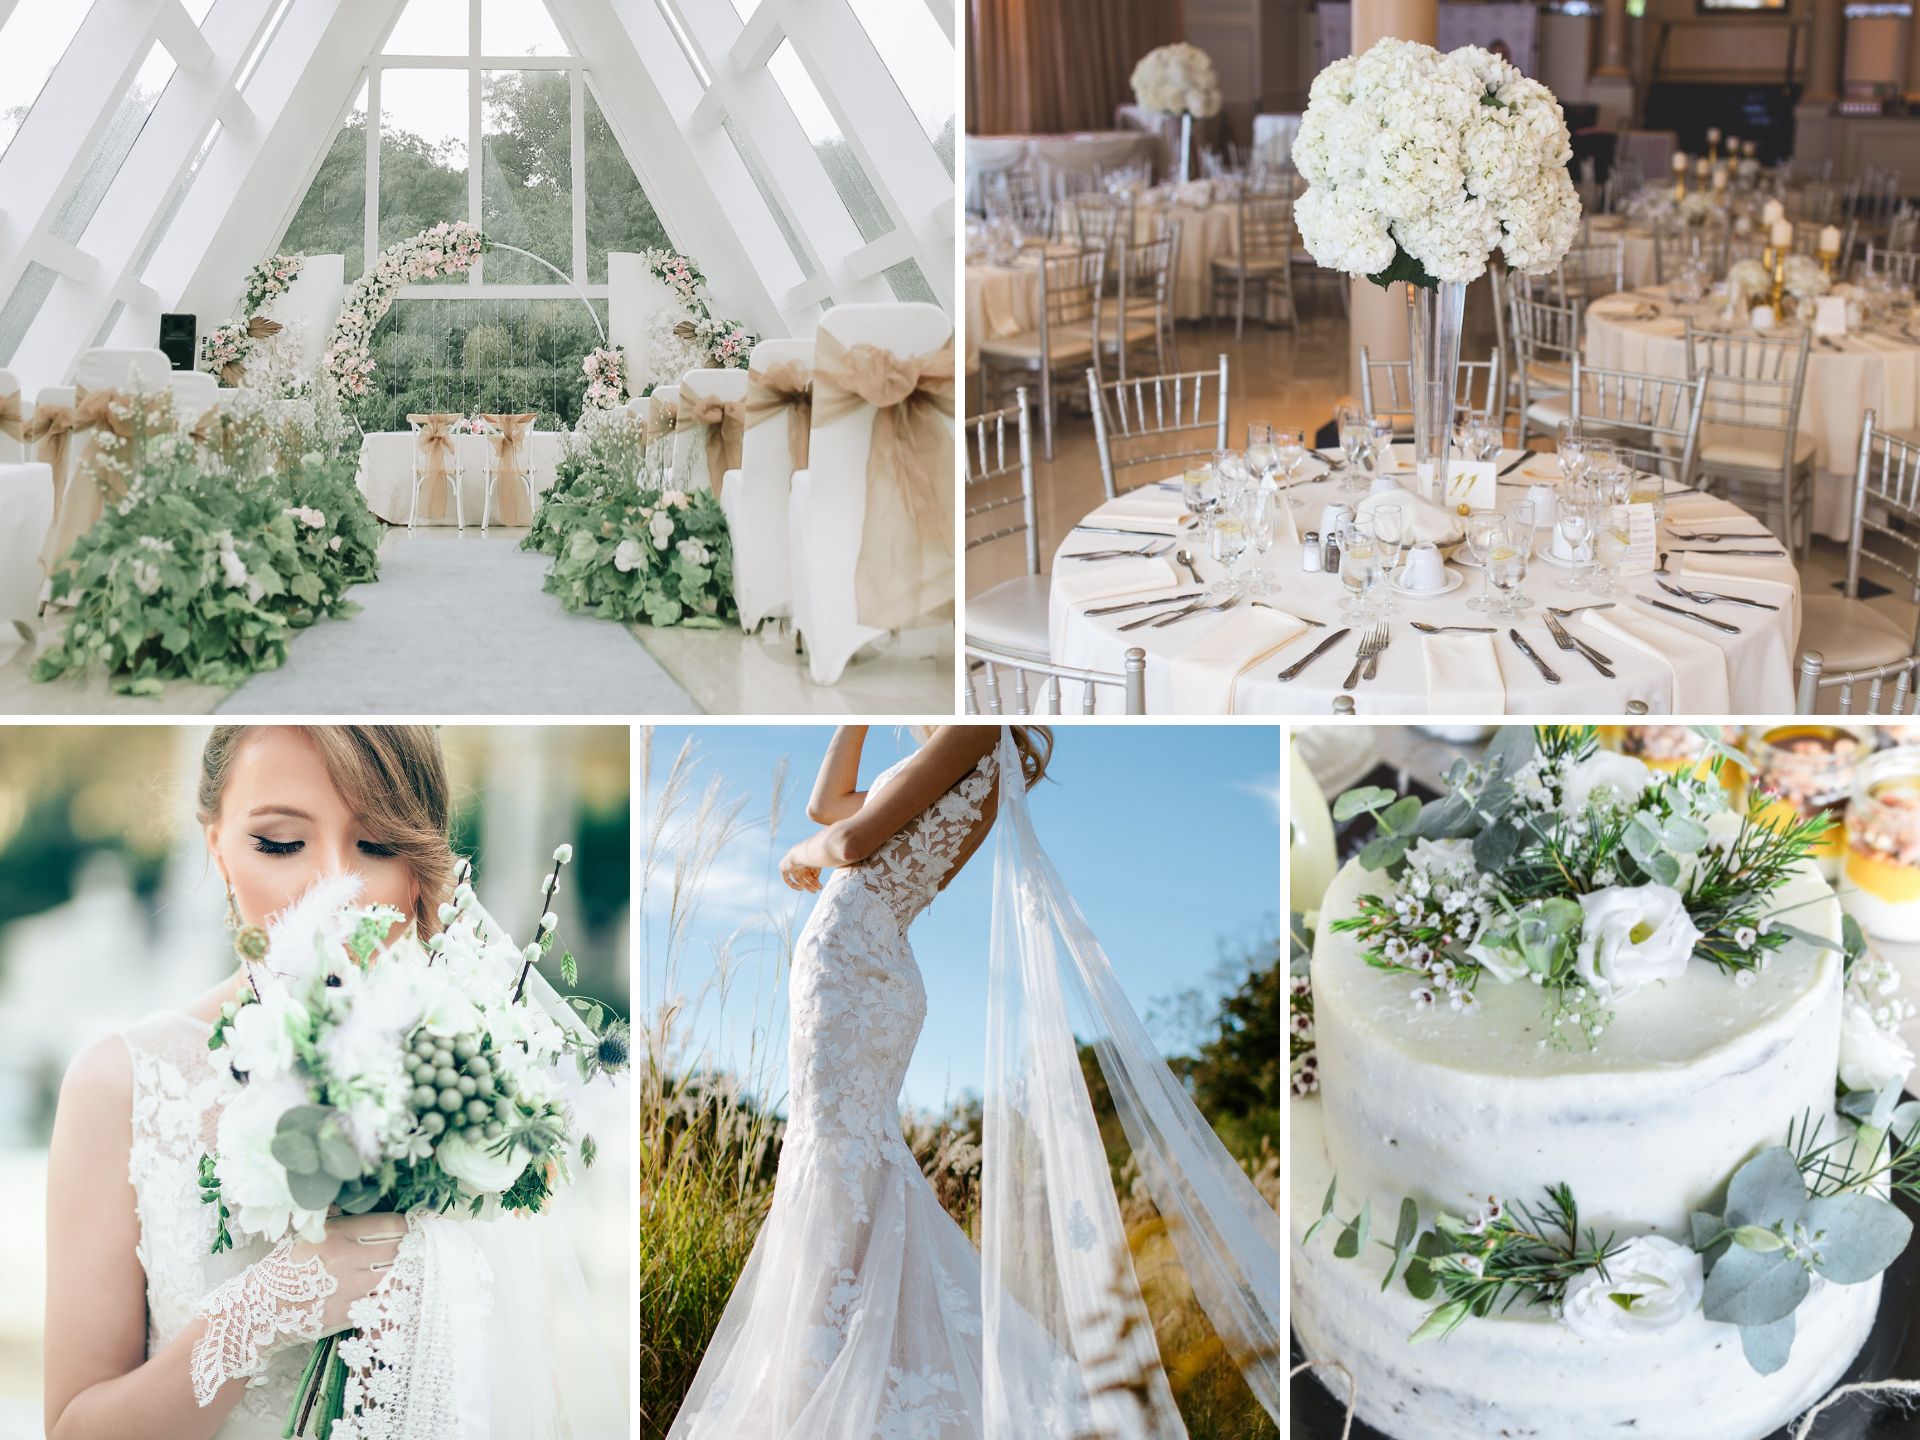 A photo collage with white wedding color ideas.